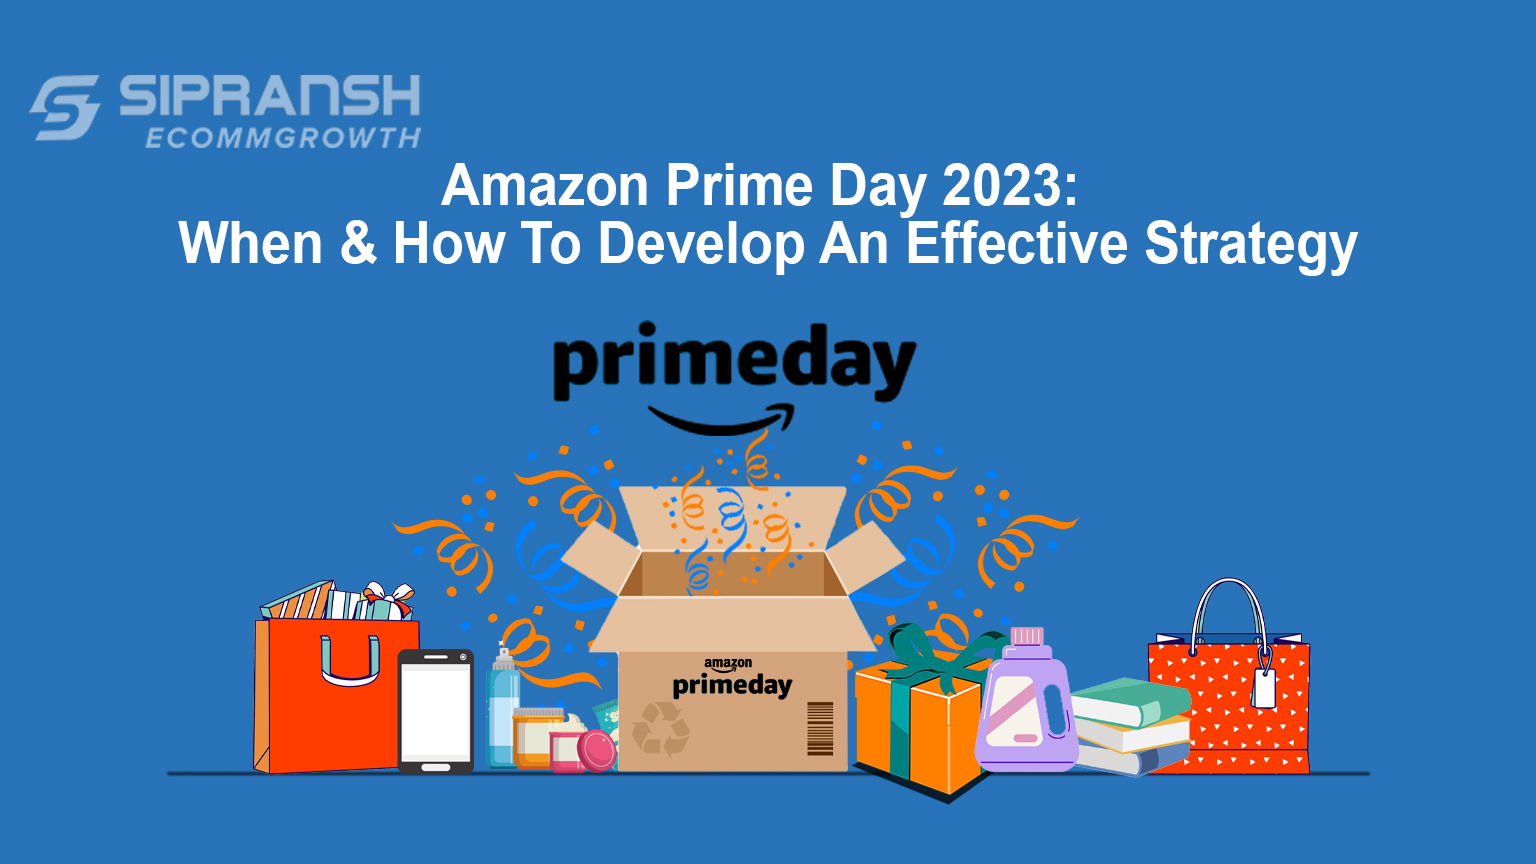 Amazon Prime Day 2023 When & How To Develop An Effective Strategy